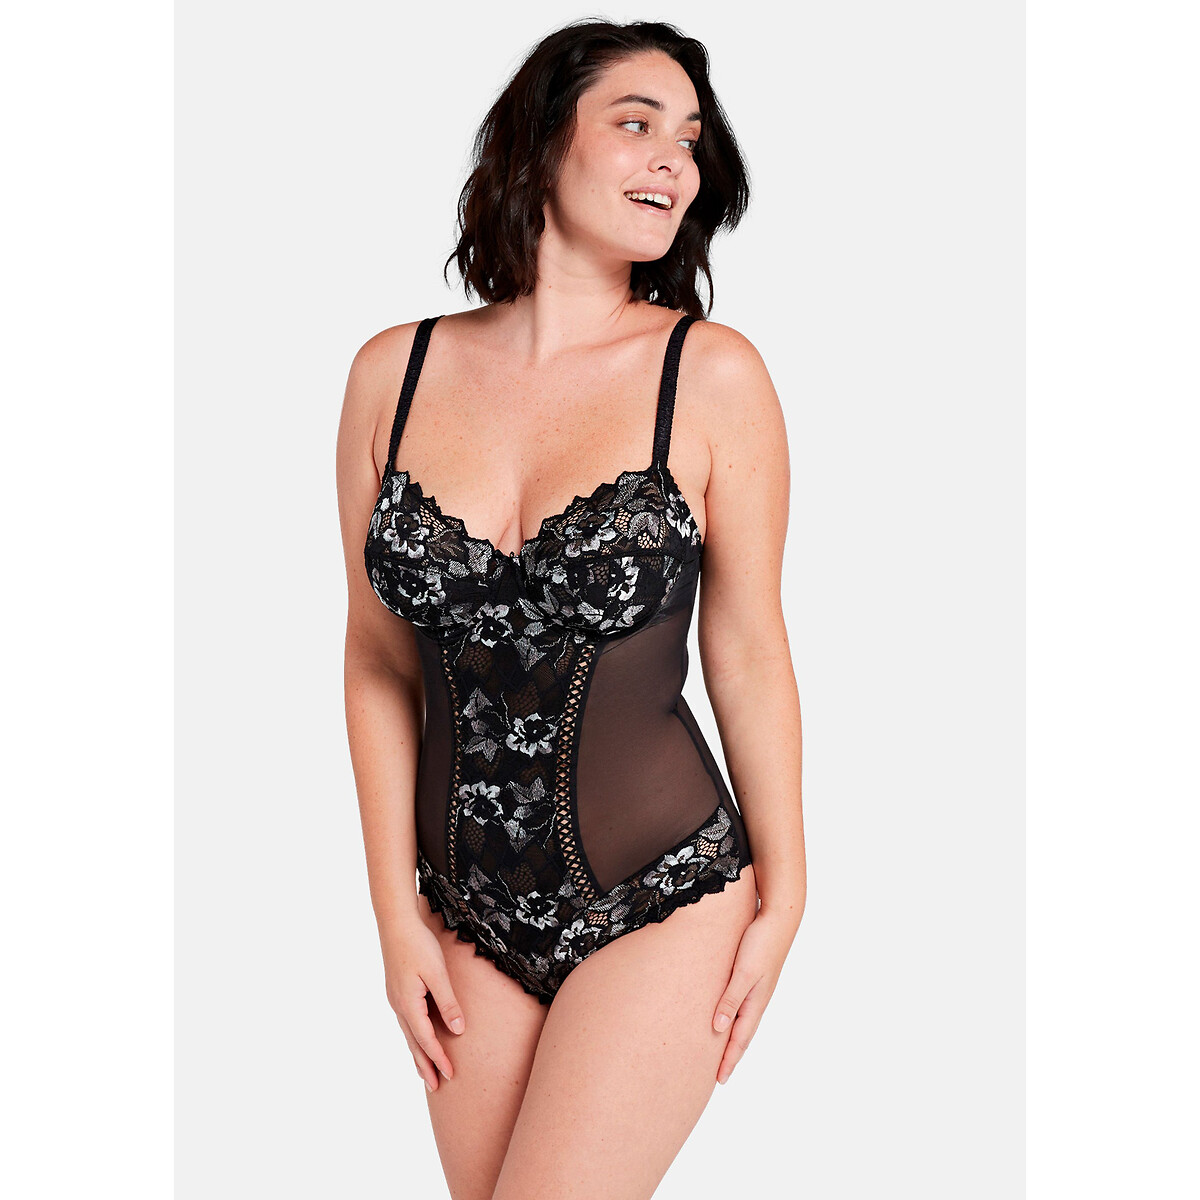 Arum gala bodysuit in lace and tulle, black, Sans Complexe